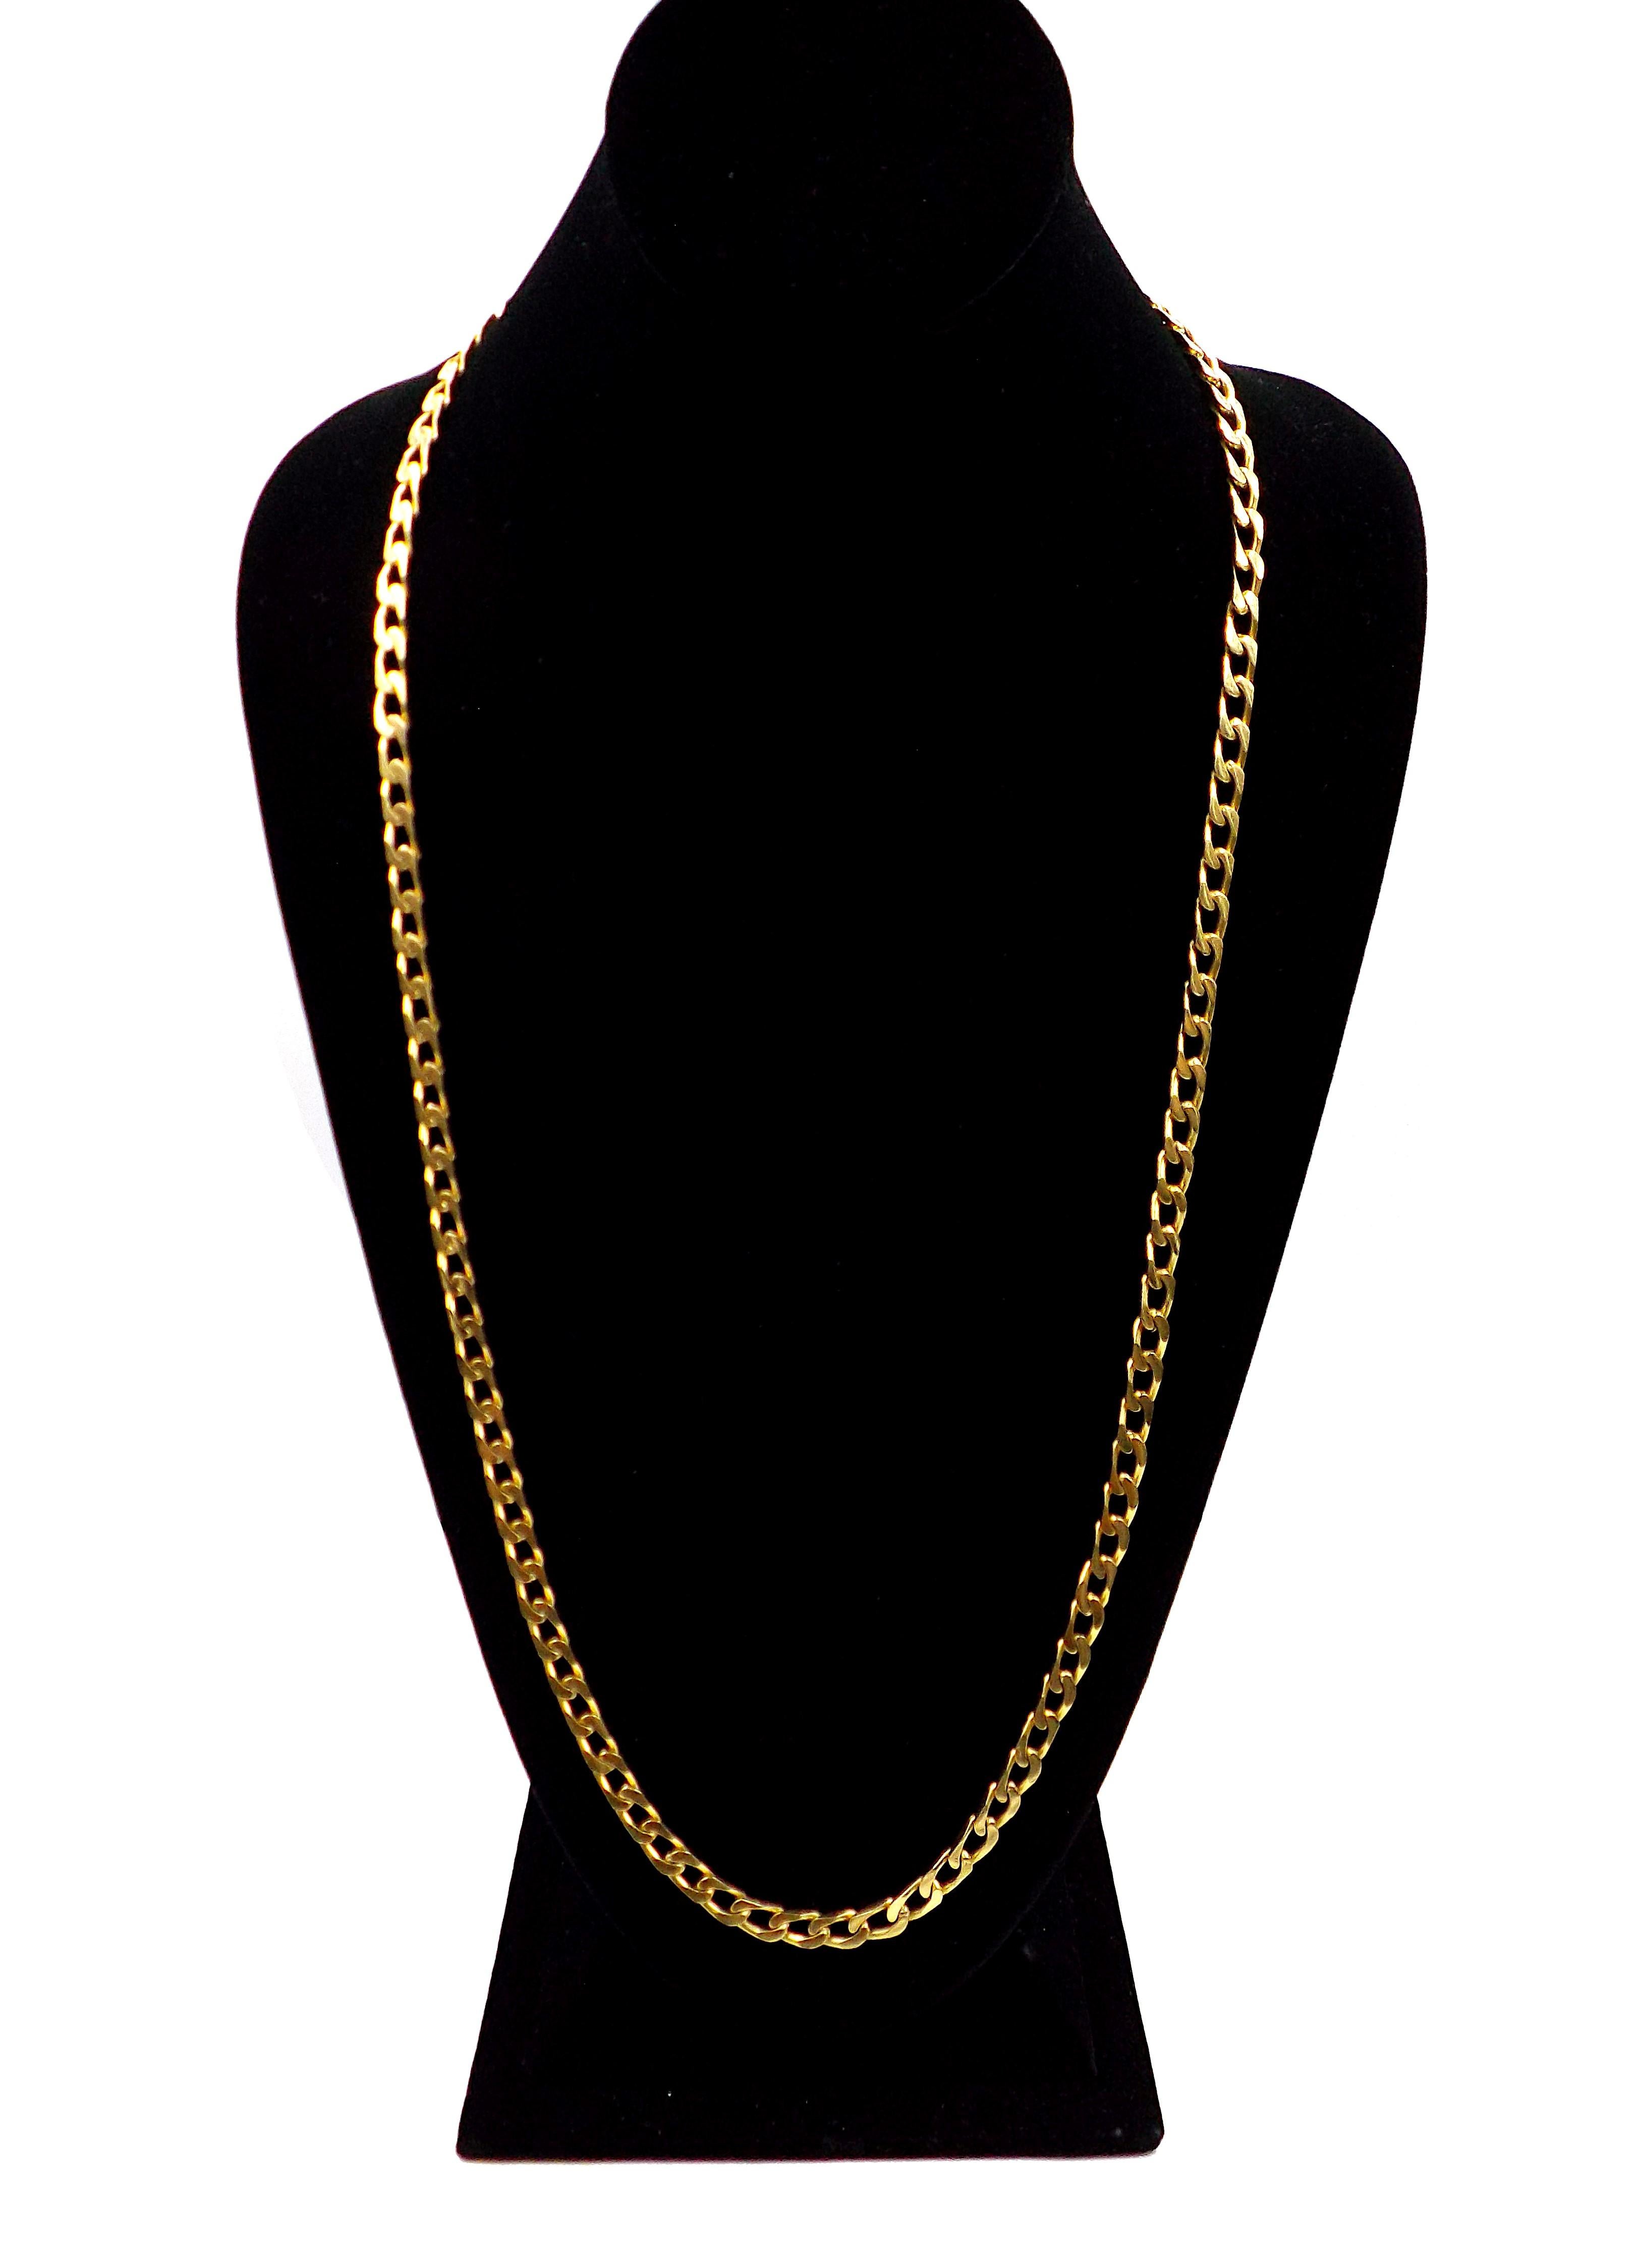 18 kt. gold, signed Bulgari, ap. 60.4 dwts. Length 31 5/8 inches.